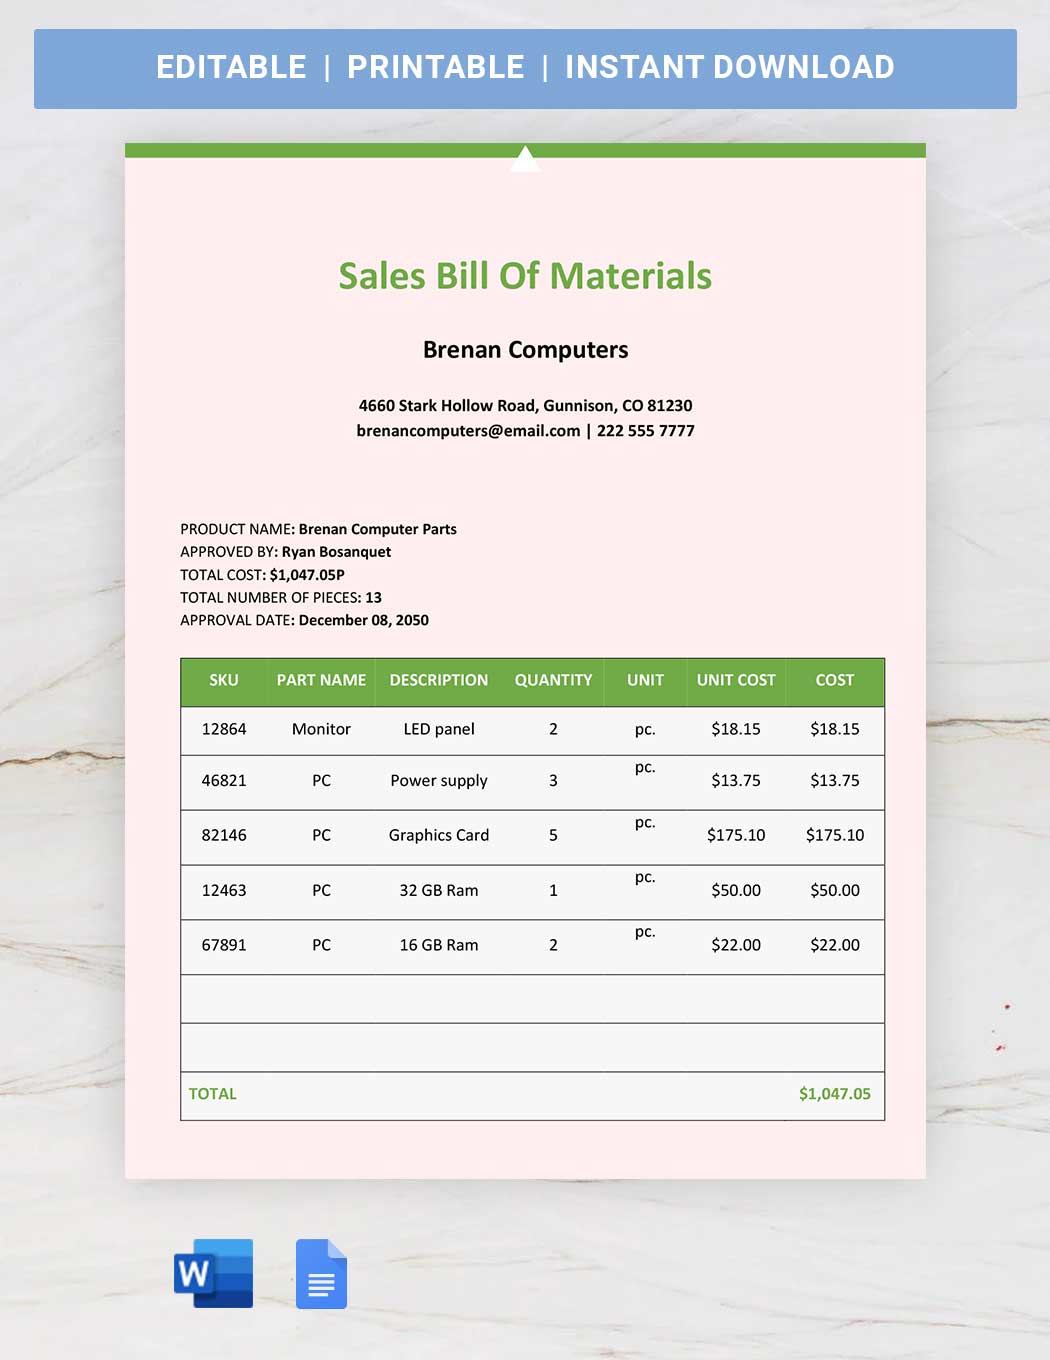 Sales Bill Of Materials Template in Word, Google Docs